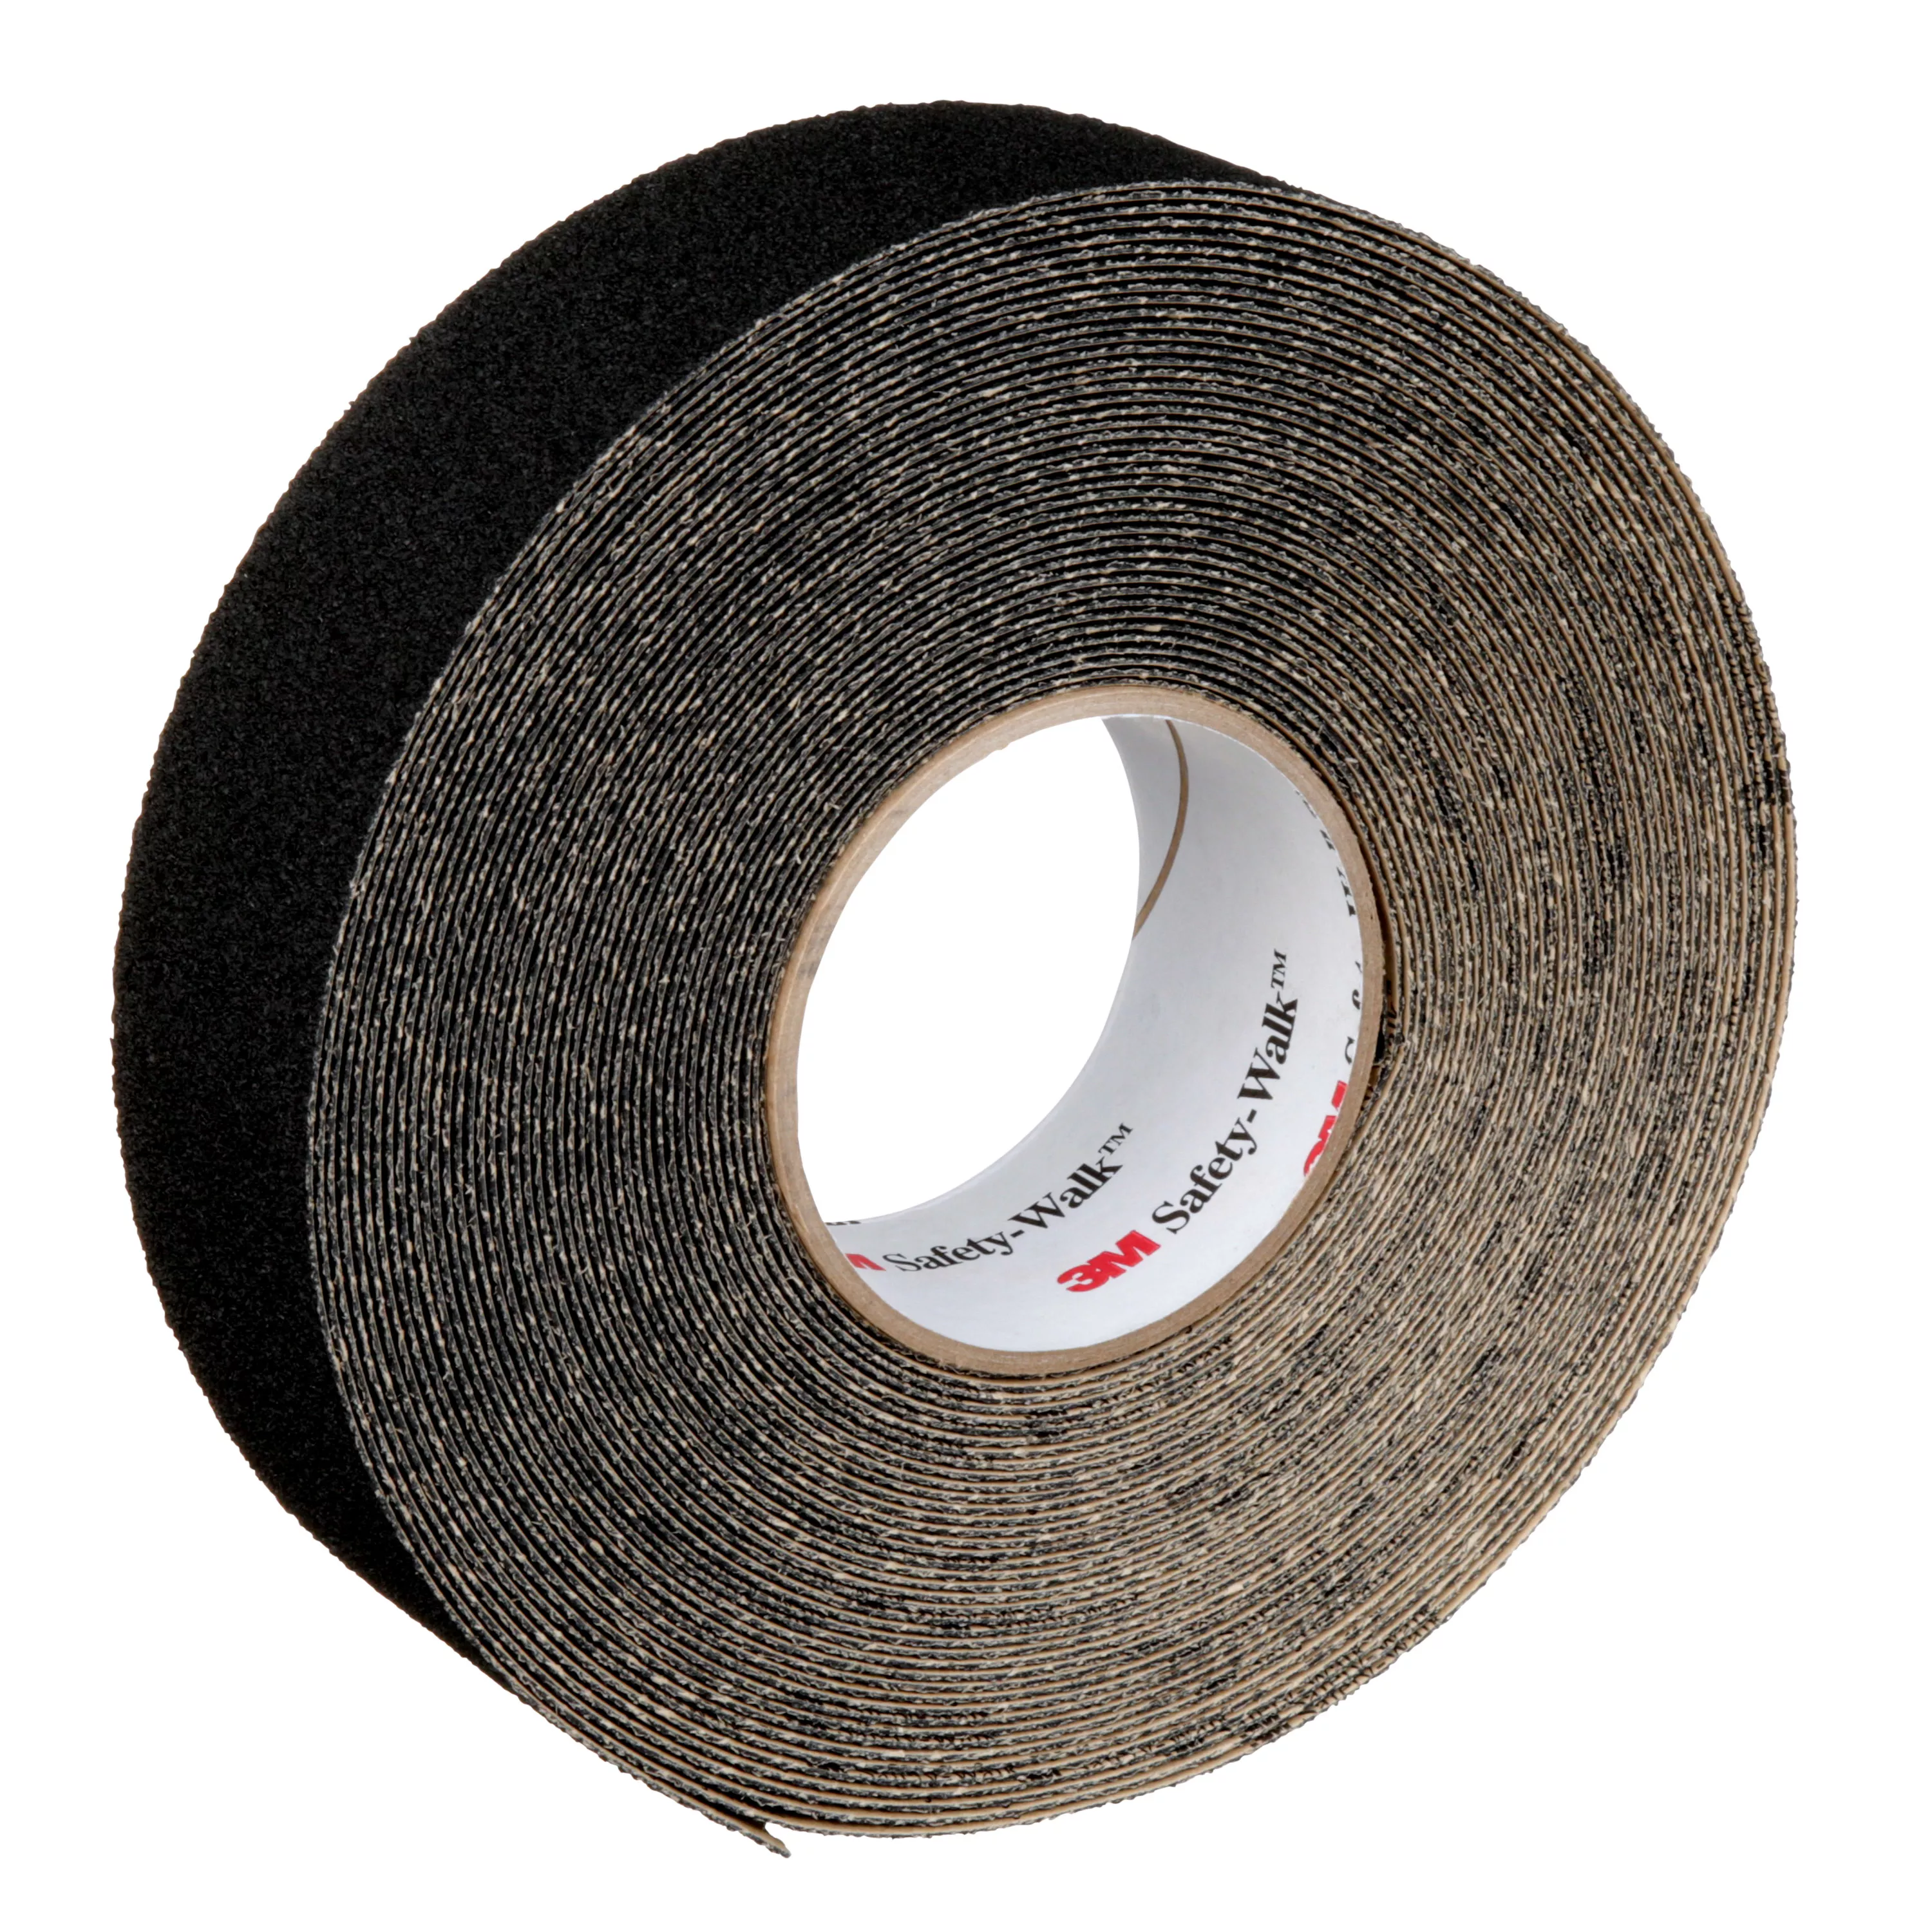 3M™ Safety-Walk™ Slip-Resistant Medium Resilient Tapes & Treads 310,
Black, 2 in x 60 ft, Roll, 2/Case